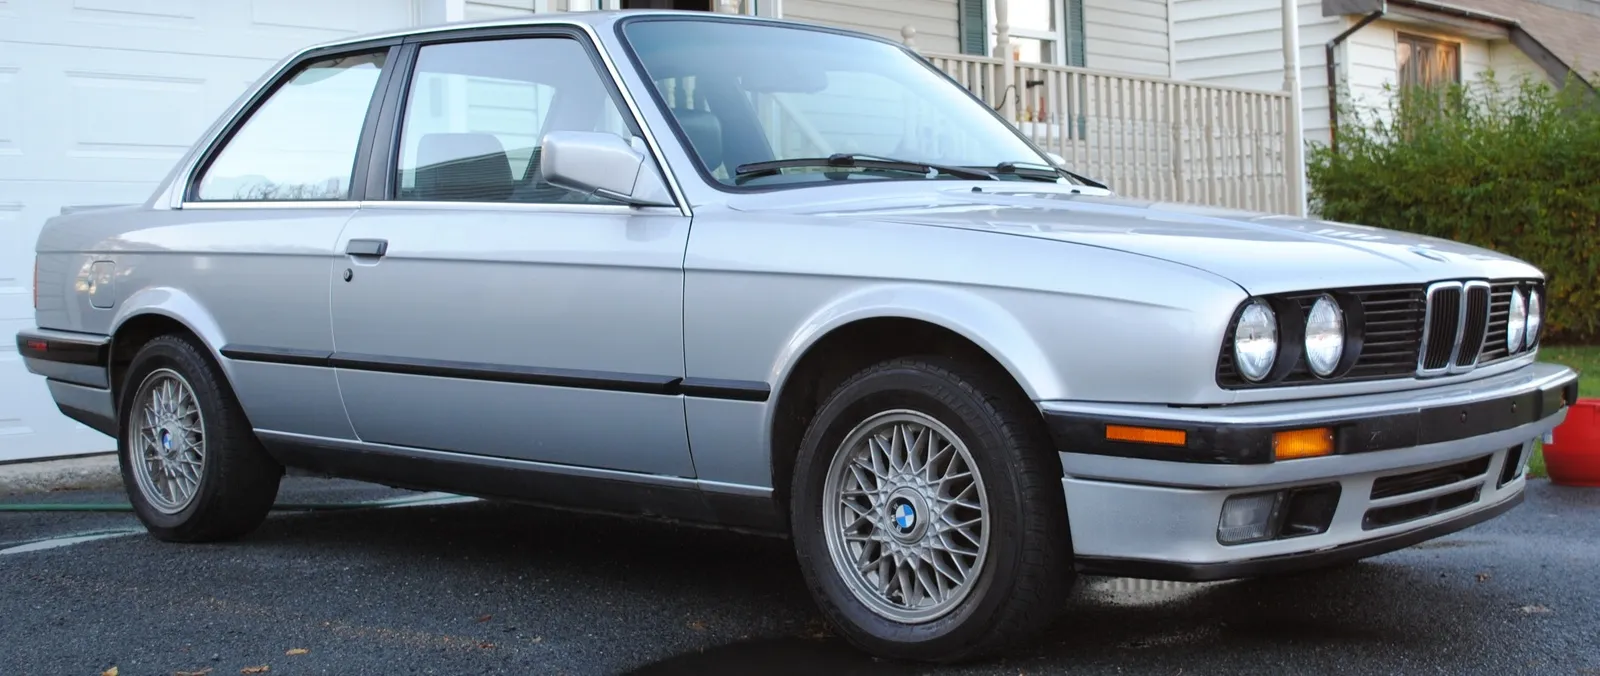 BMW 3 series 325is 1990 photo - 3